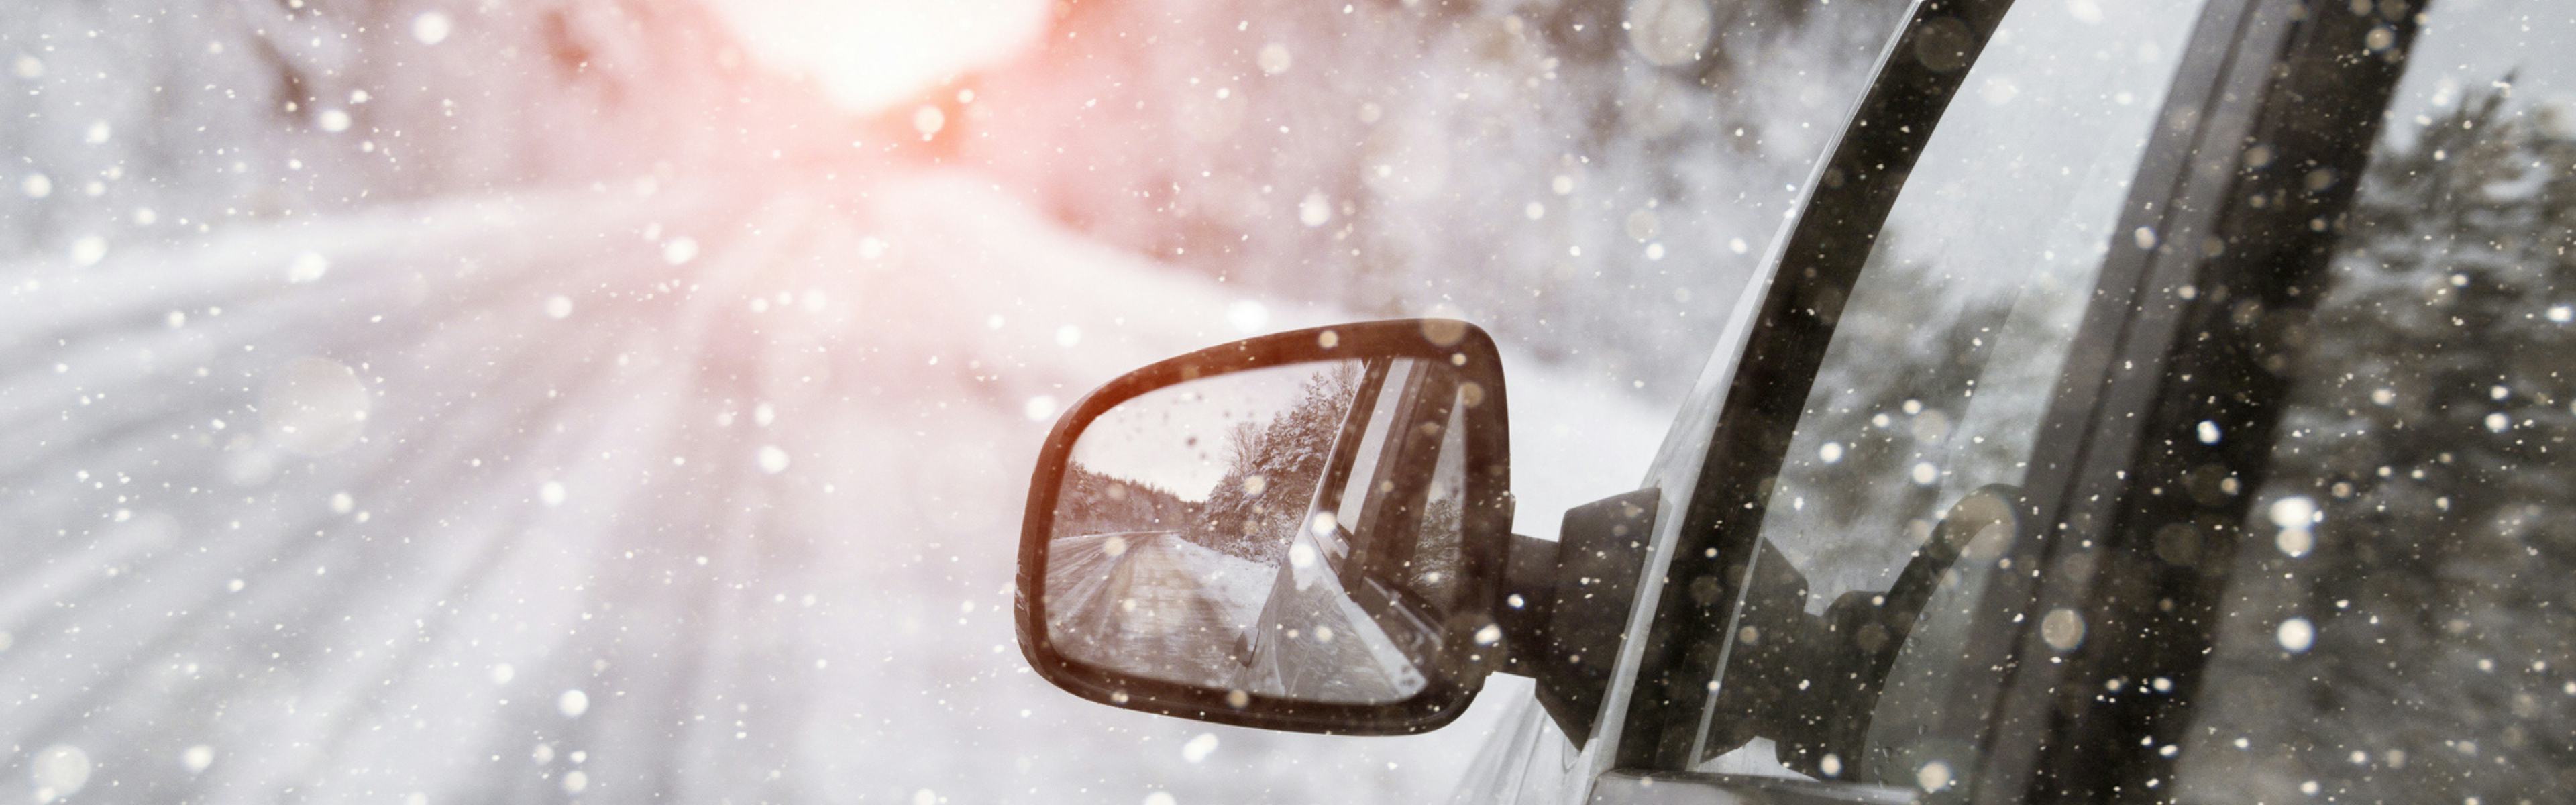 How to Take Your Car Out of Winter Storage - NAPA Auto Parts - NAPA Canada  blog